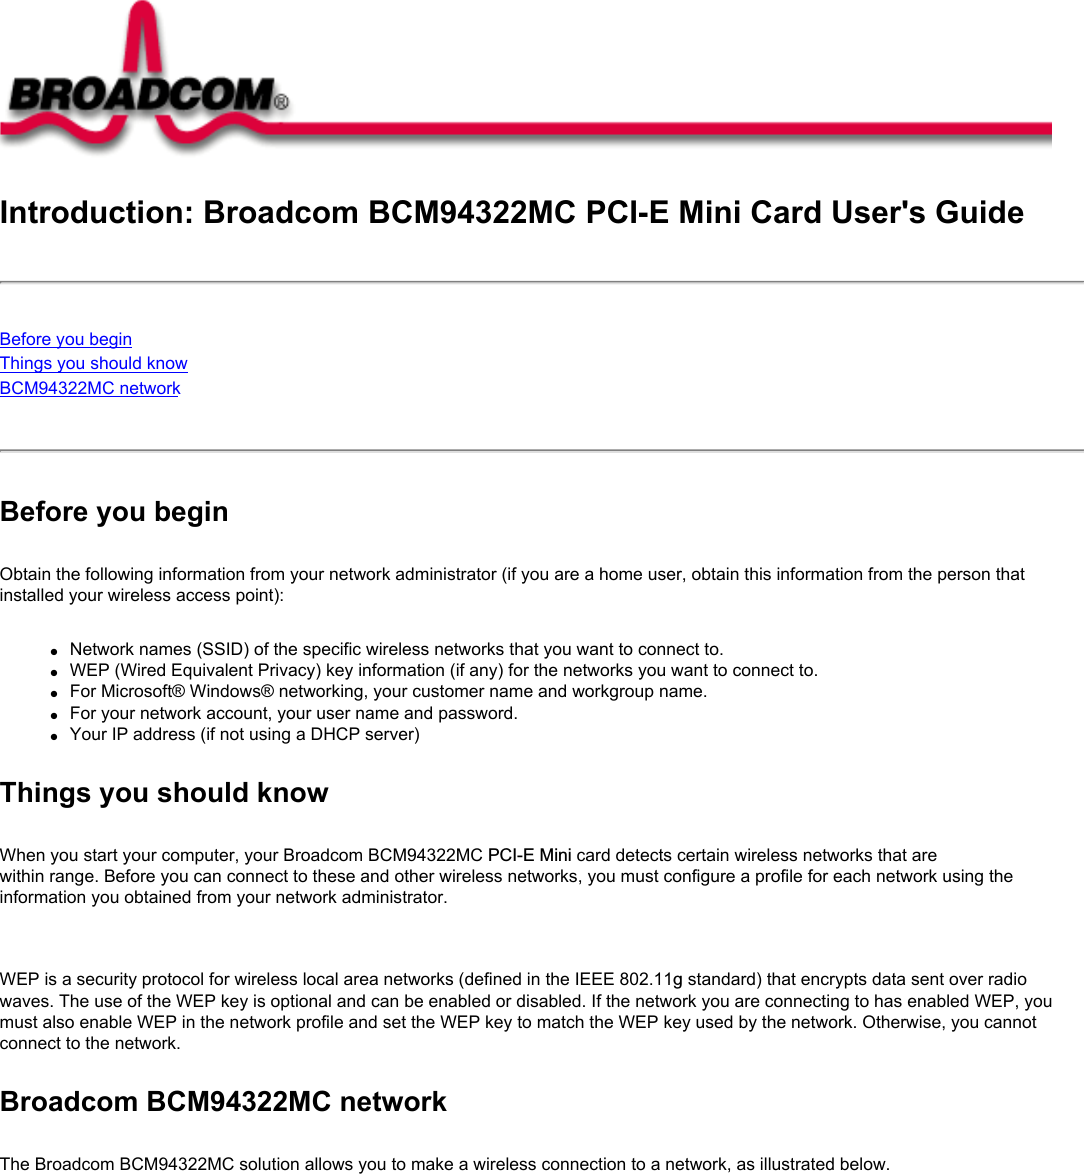 Introduction: Broadcom BCM94322MC PCI-E Mini Card User&apos;s GuideBefore you beginThings you should knowBCM94322MC network Before you beginObtain the following information from your network administrator (if you are a home user, obtain this information from the person that installed your wireless access point):●     Network names (SSID) of the specific wireless networks that you want to connect to.●     WEP (Wired Equivalent Privacy) key information (if any) for the networks you want to connect to.●     For Microsoft® Windows® networking, your customer name and workgroup name.●     For your network account, your user name and password.●     Your IP address (if not using a DHCP server)Things you should knowWhen you start your computer, your Broadcom BCM94322MC PCI-E Mini card detects certain wireless networks that are within range. Before you can connect to these and other wireless networks, you must configure a profile for each network using the information you obtained from your network administrator.   WEP is a security protocol for wireless local area networks (defined in the IEEE 802.11g standard) that encrypts data sent over radio waves. The use of the WEP key is optional and can be enabled or disabled. If the network you are connecting to has enabled WEP, you must also enable WEP in the network profile and set the WEP key to match the WEP key used by the network. Otherwise, you cannot connect to the network.Broadcom BCM94322MC networkThe Broadcom BCM94322MC solution allows you to make a wireless connection to a network, as illustrated below.